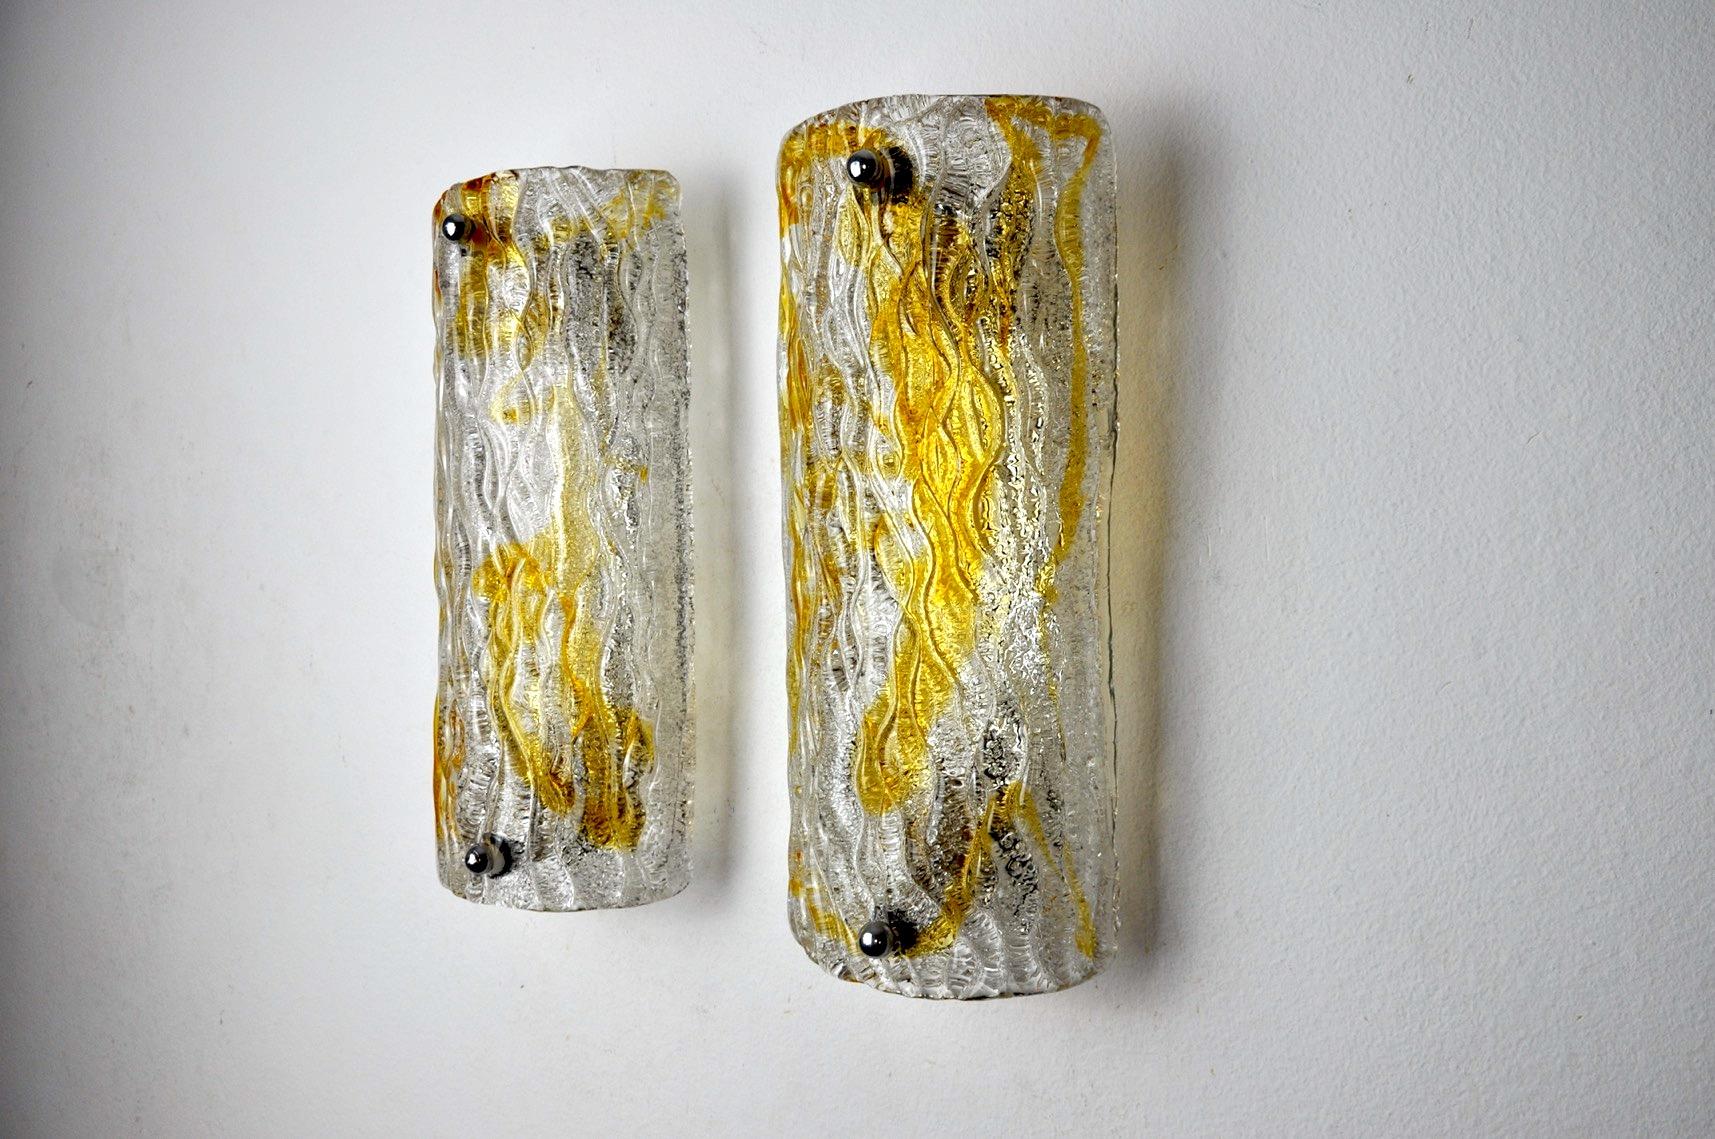 Hollywood Regency Pair of Mazzega Wall Lamps, Orange Murano Blown Glass, Italy, circa 1960 For Sale